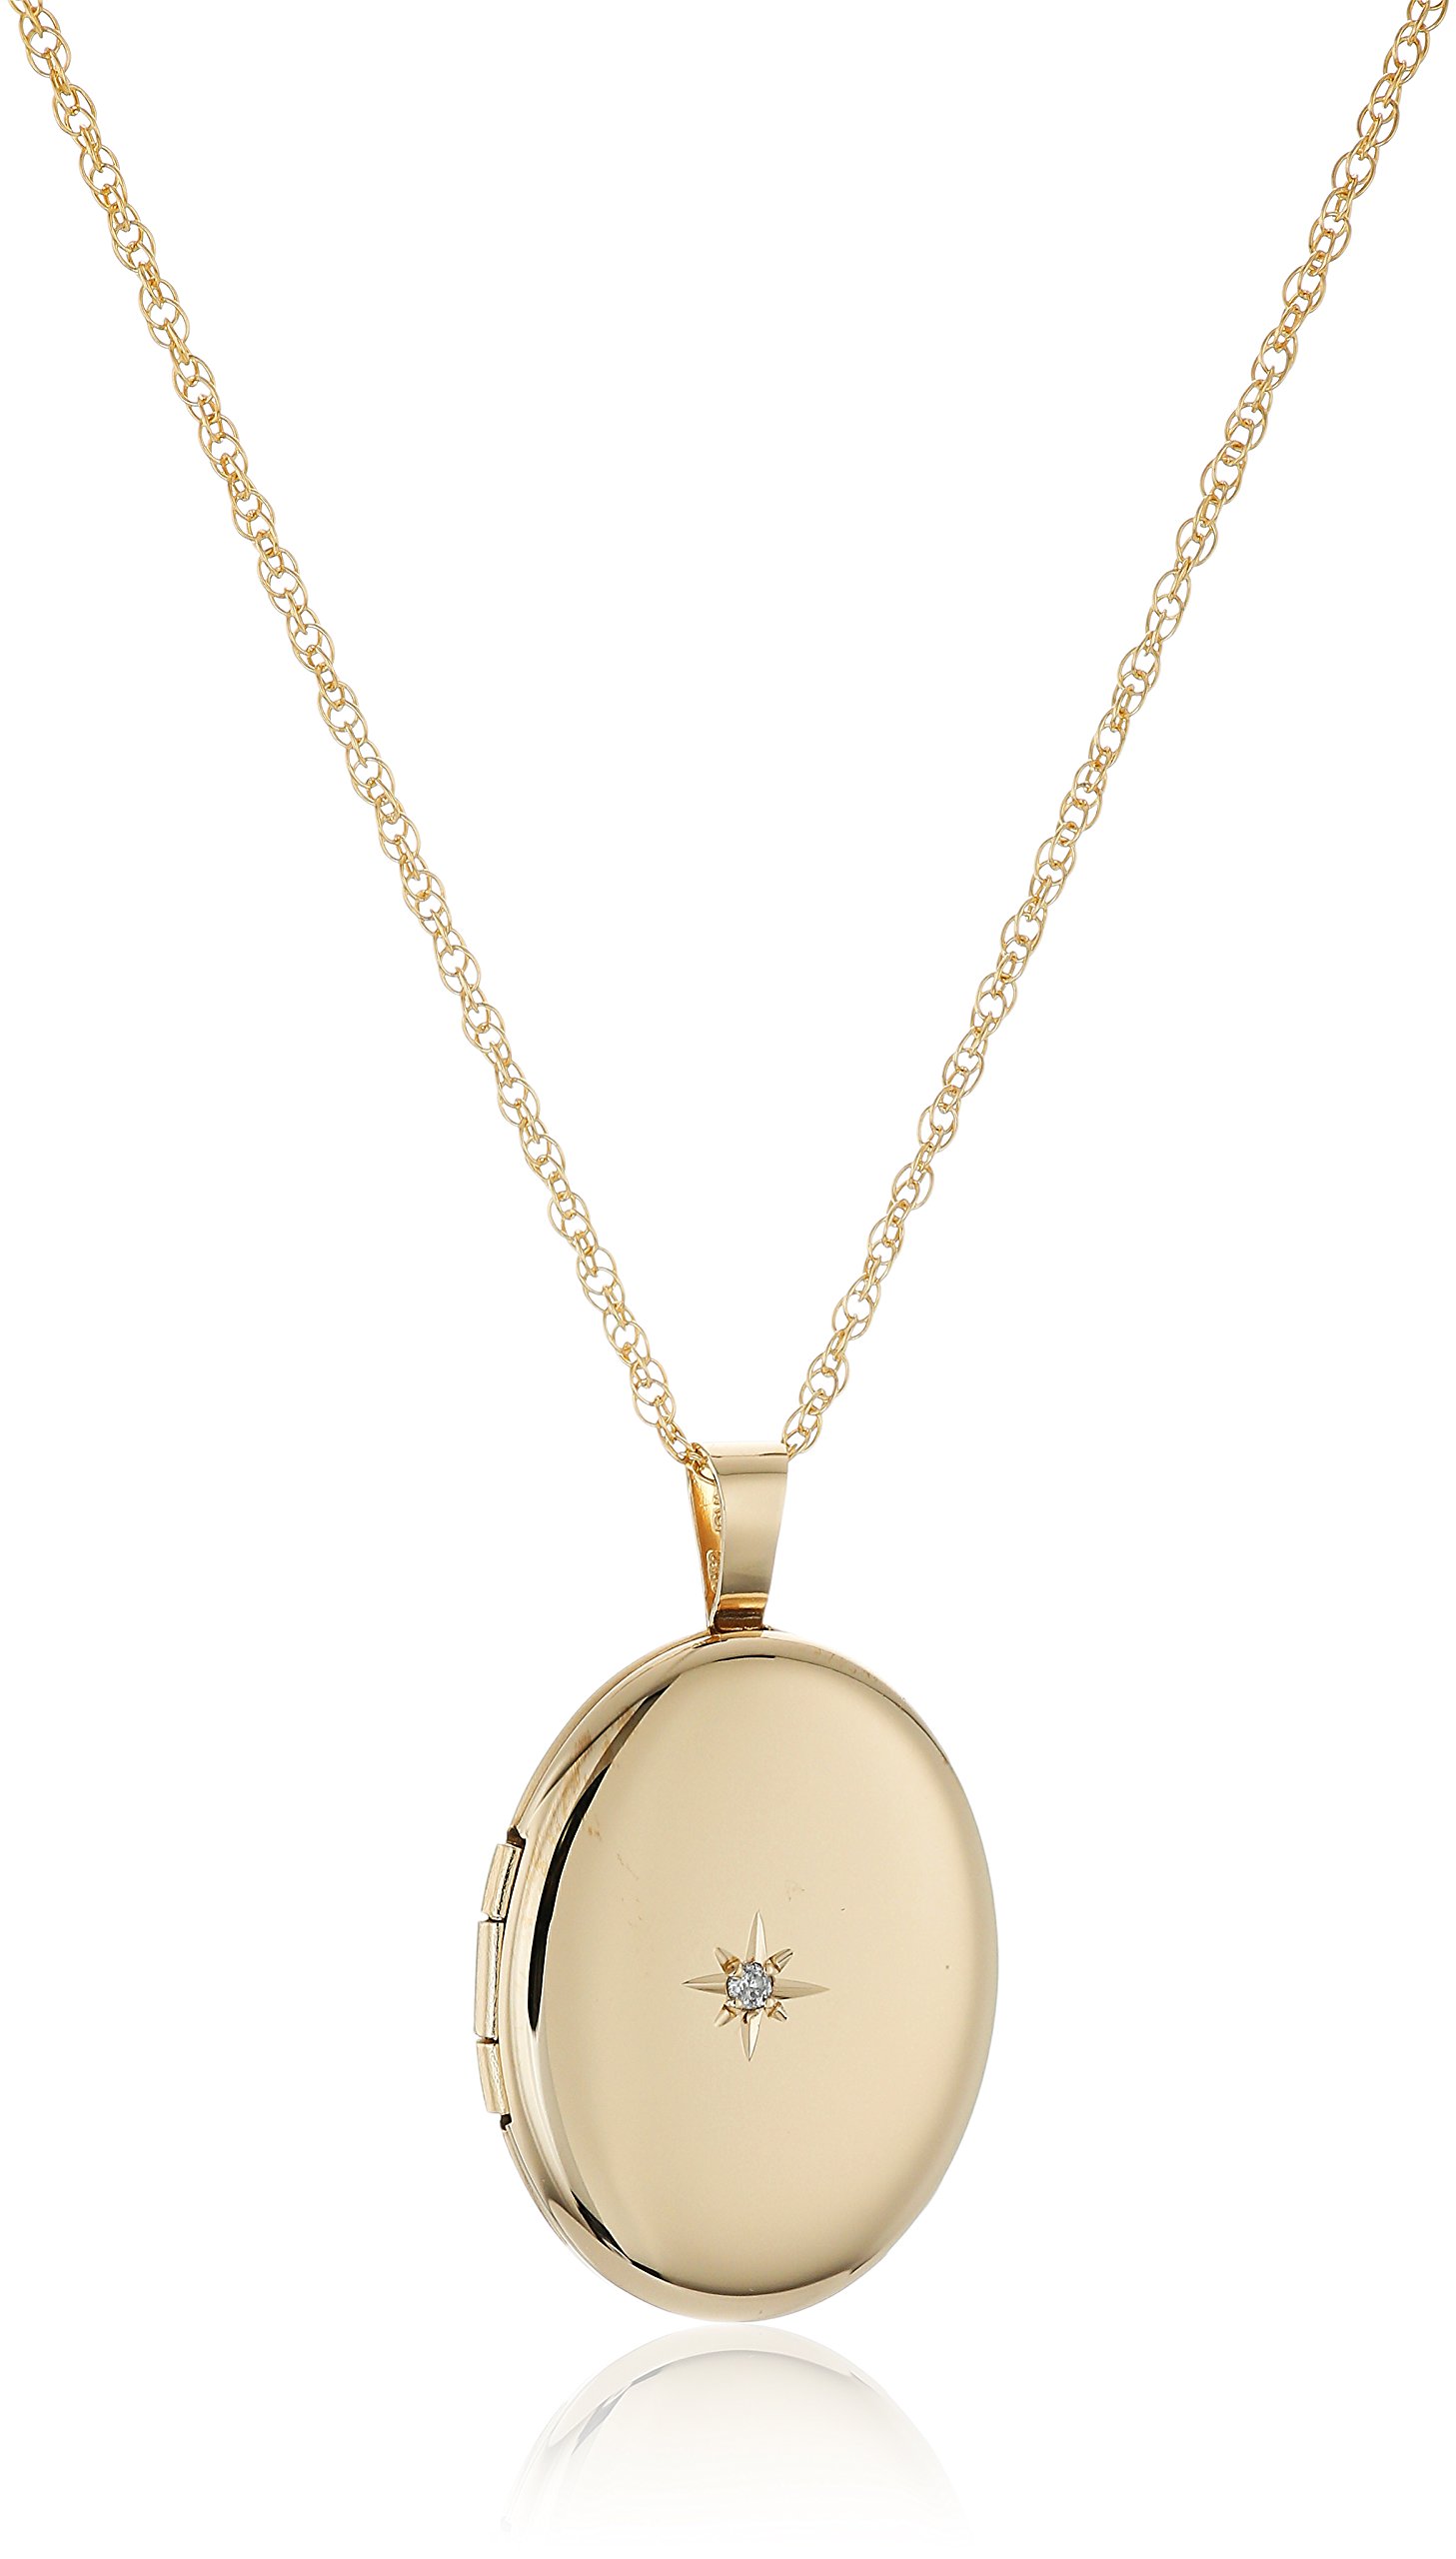 Amazon Collection 14k Gold-Filled Polished Oval Pendant with Genuine Diamond Locket Necklace, 18